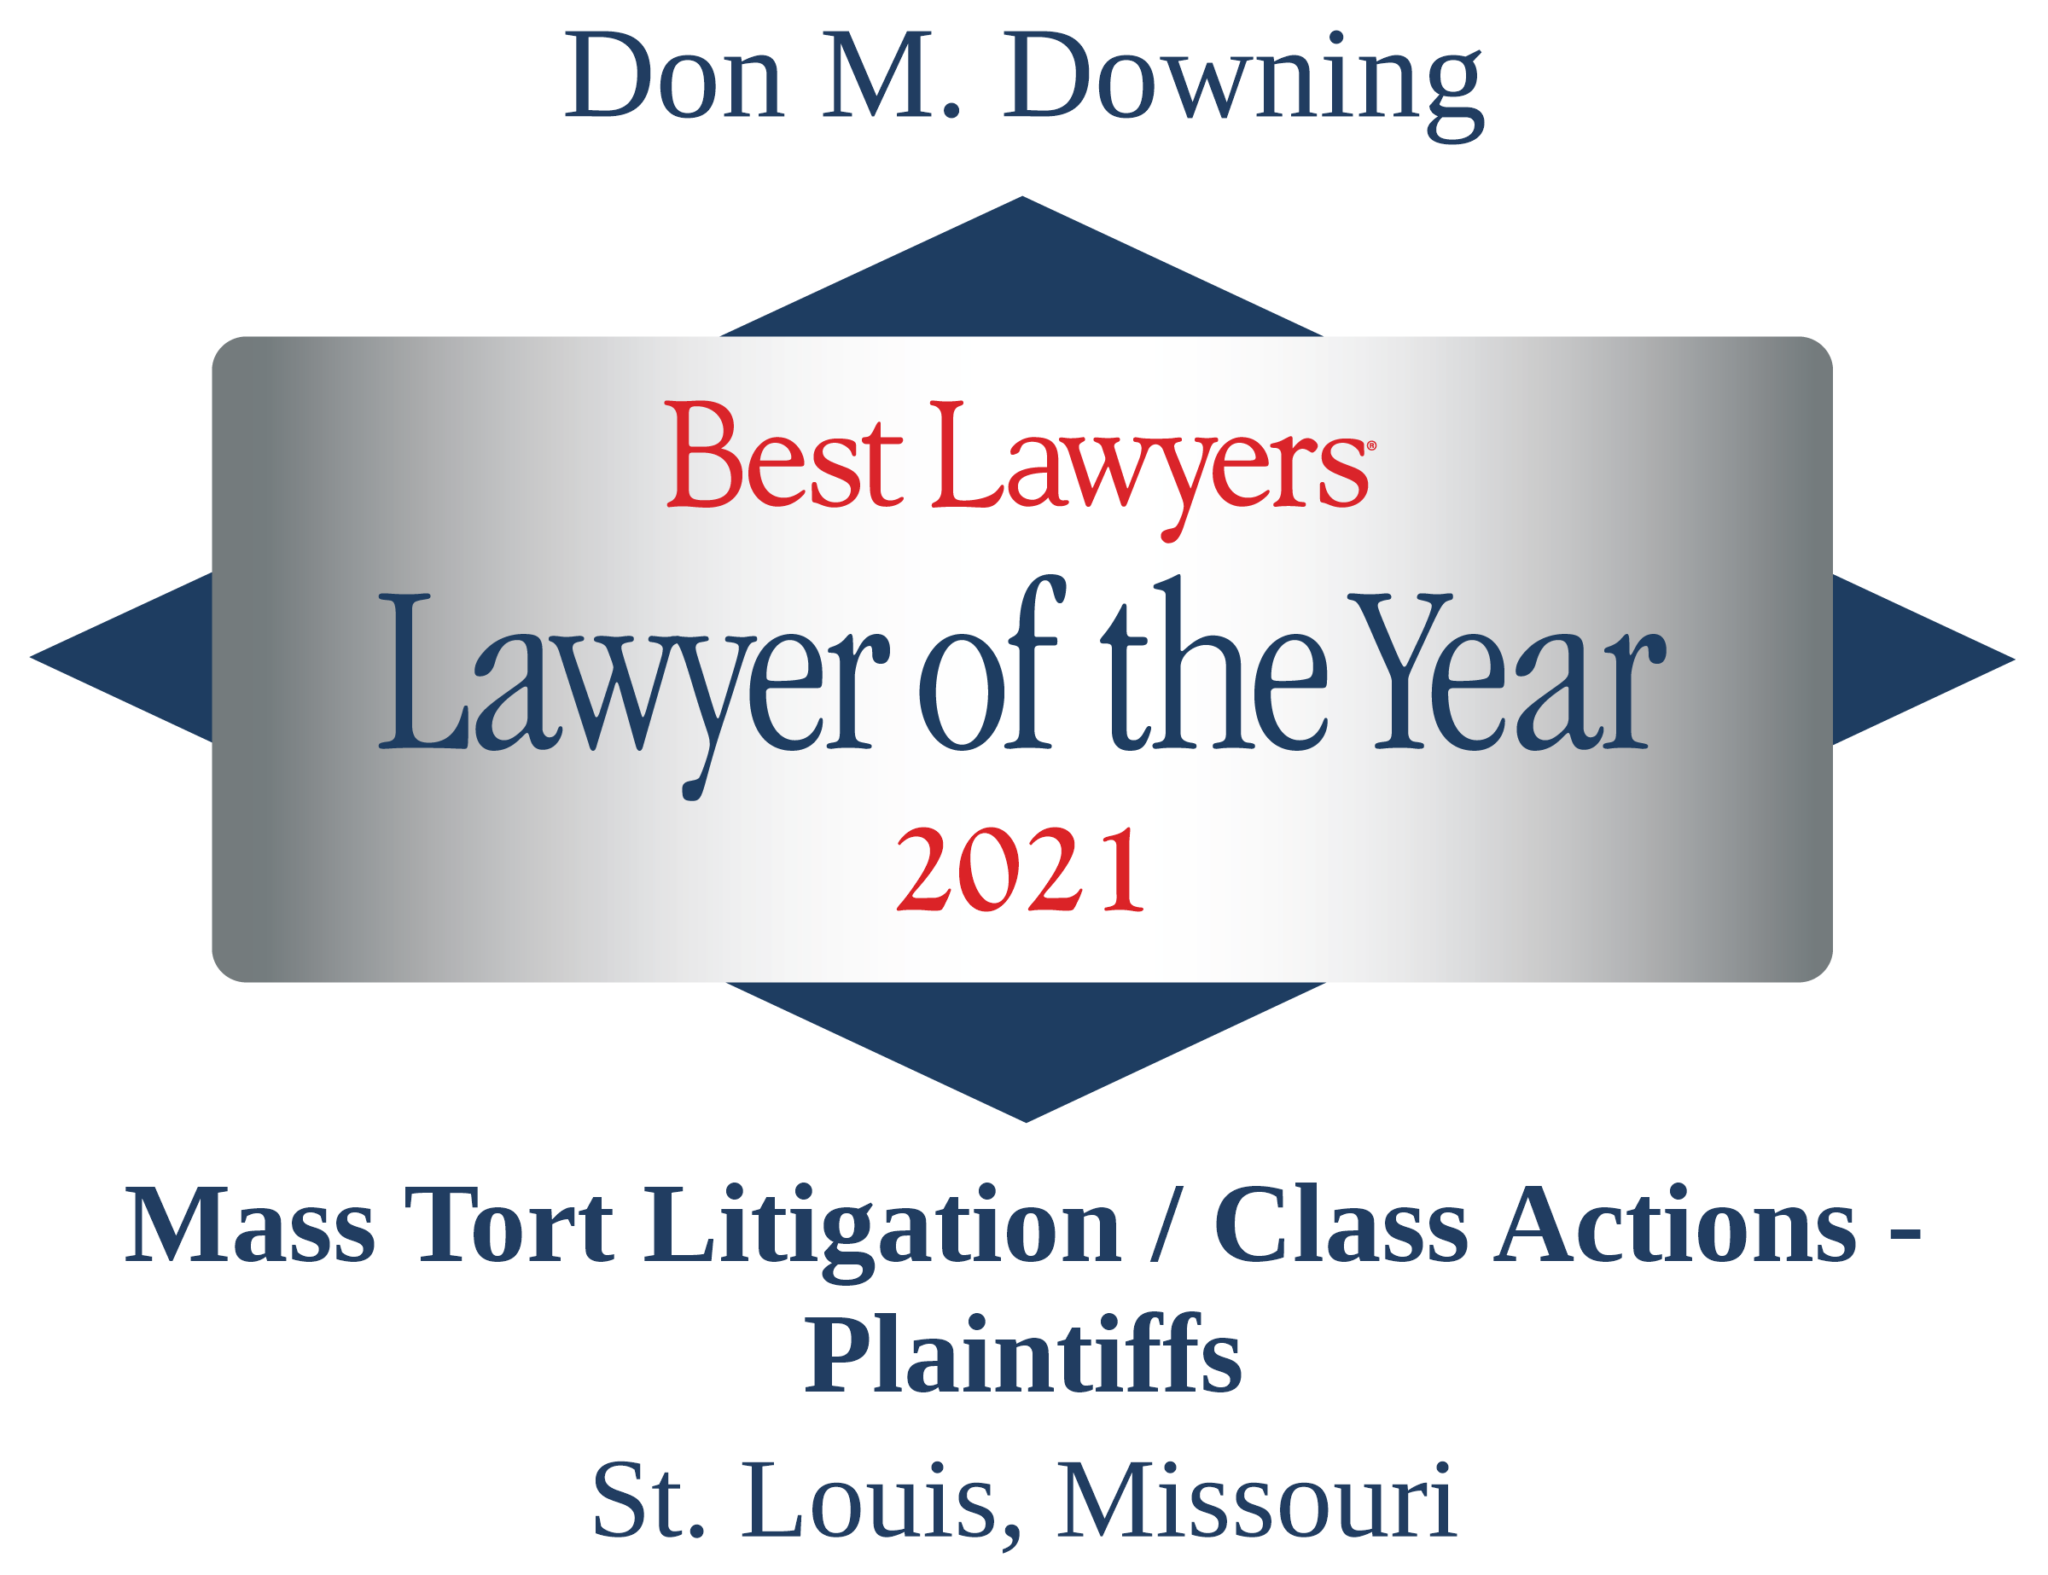 Don Downing Lawyer of the Year 2021 badge